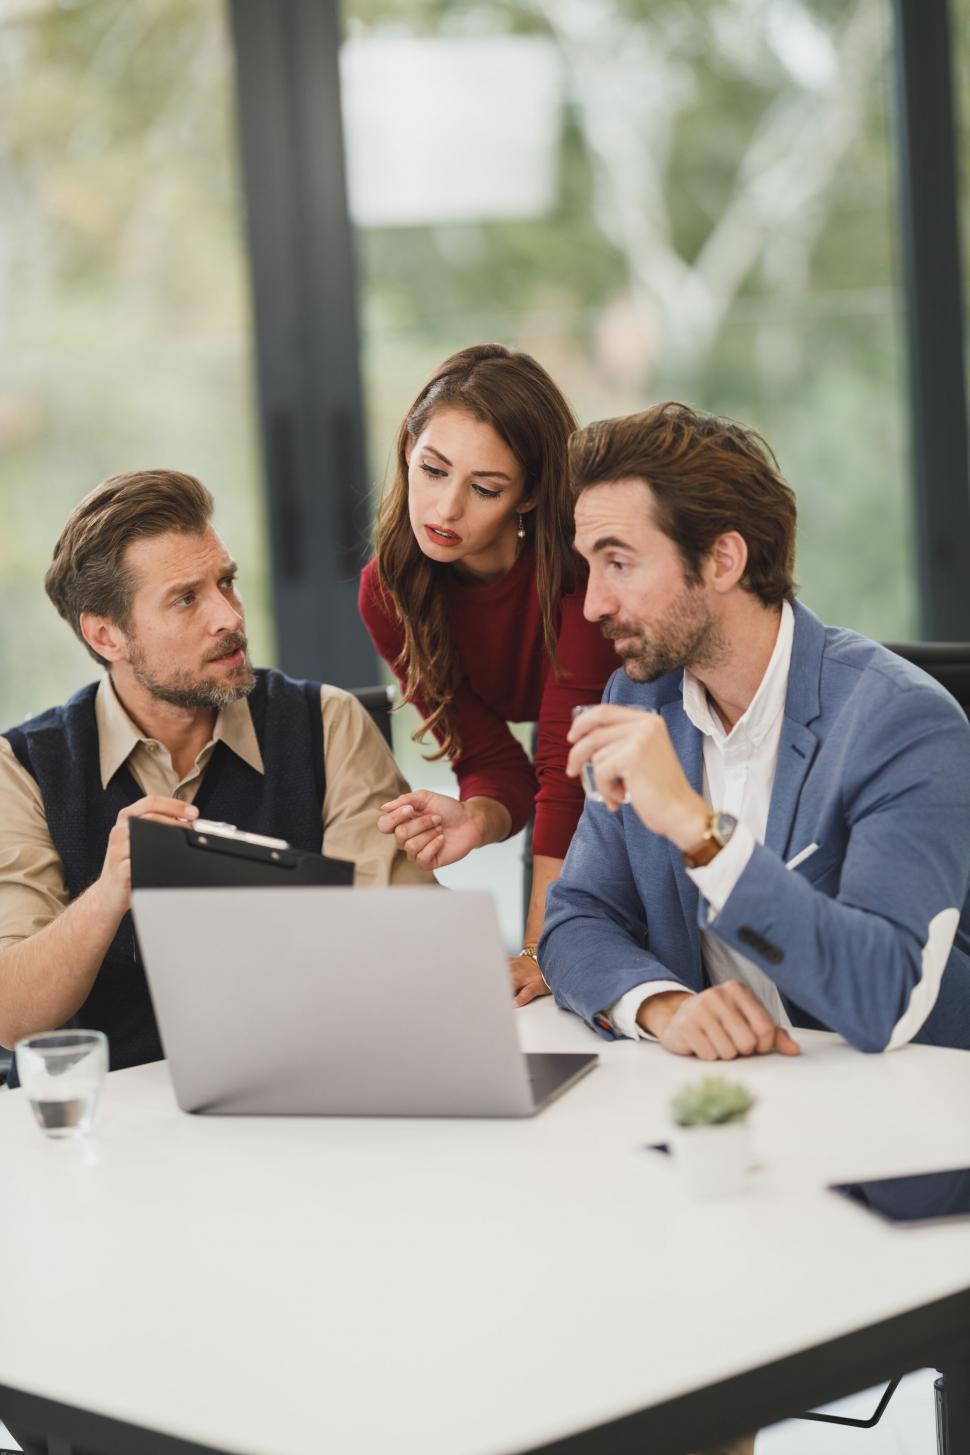 Free Image of Colleagues discussing over laptop in office 